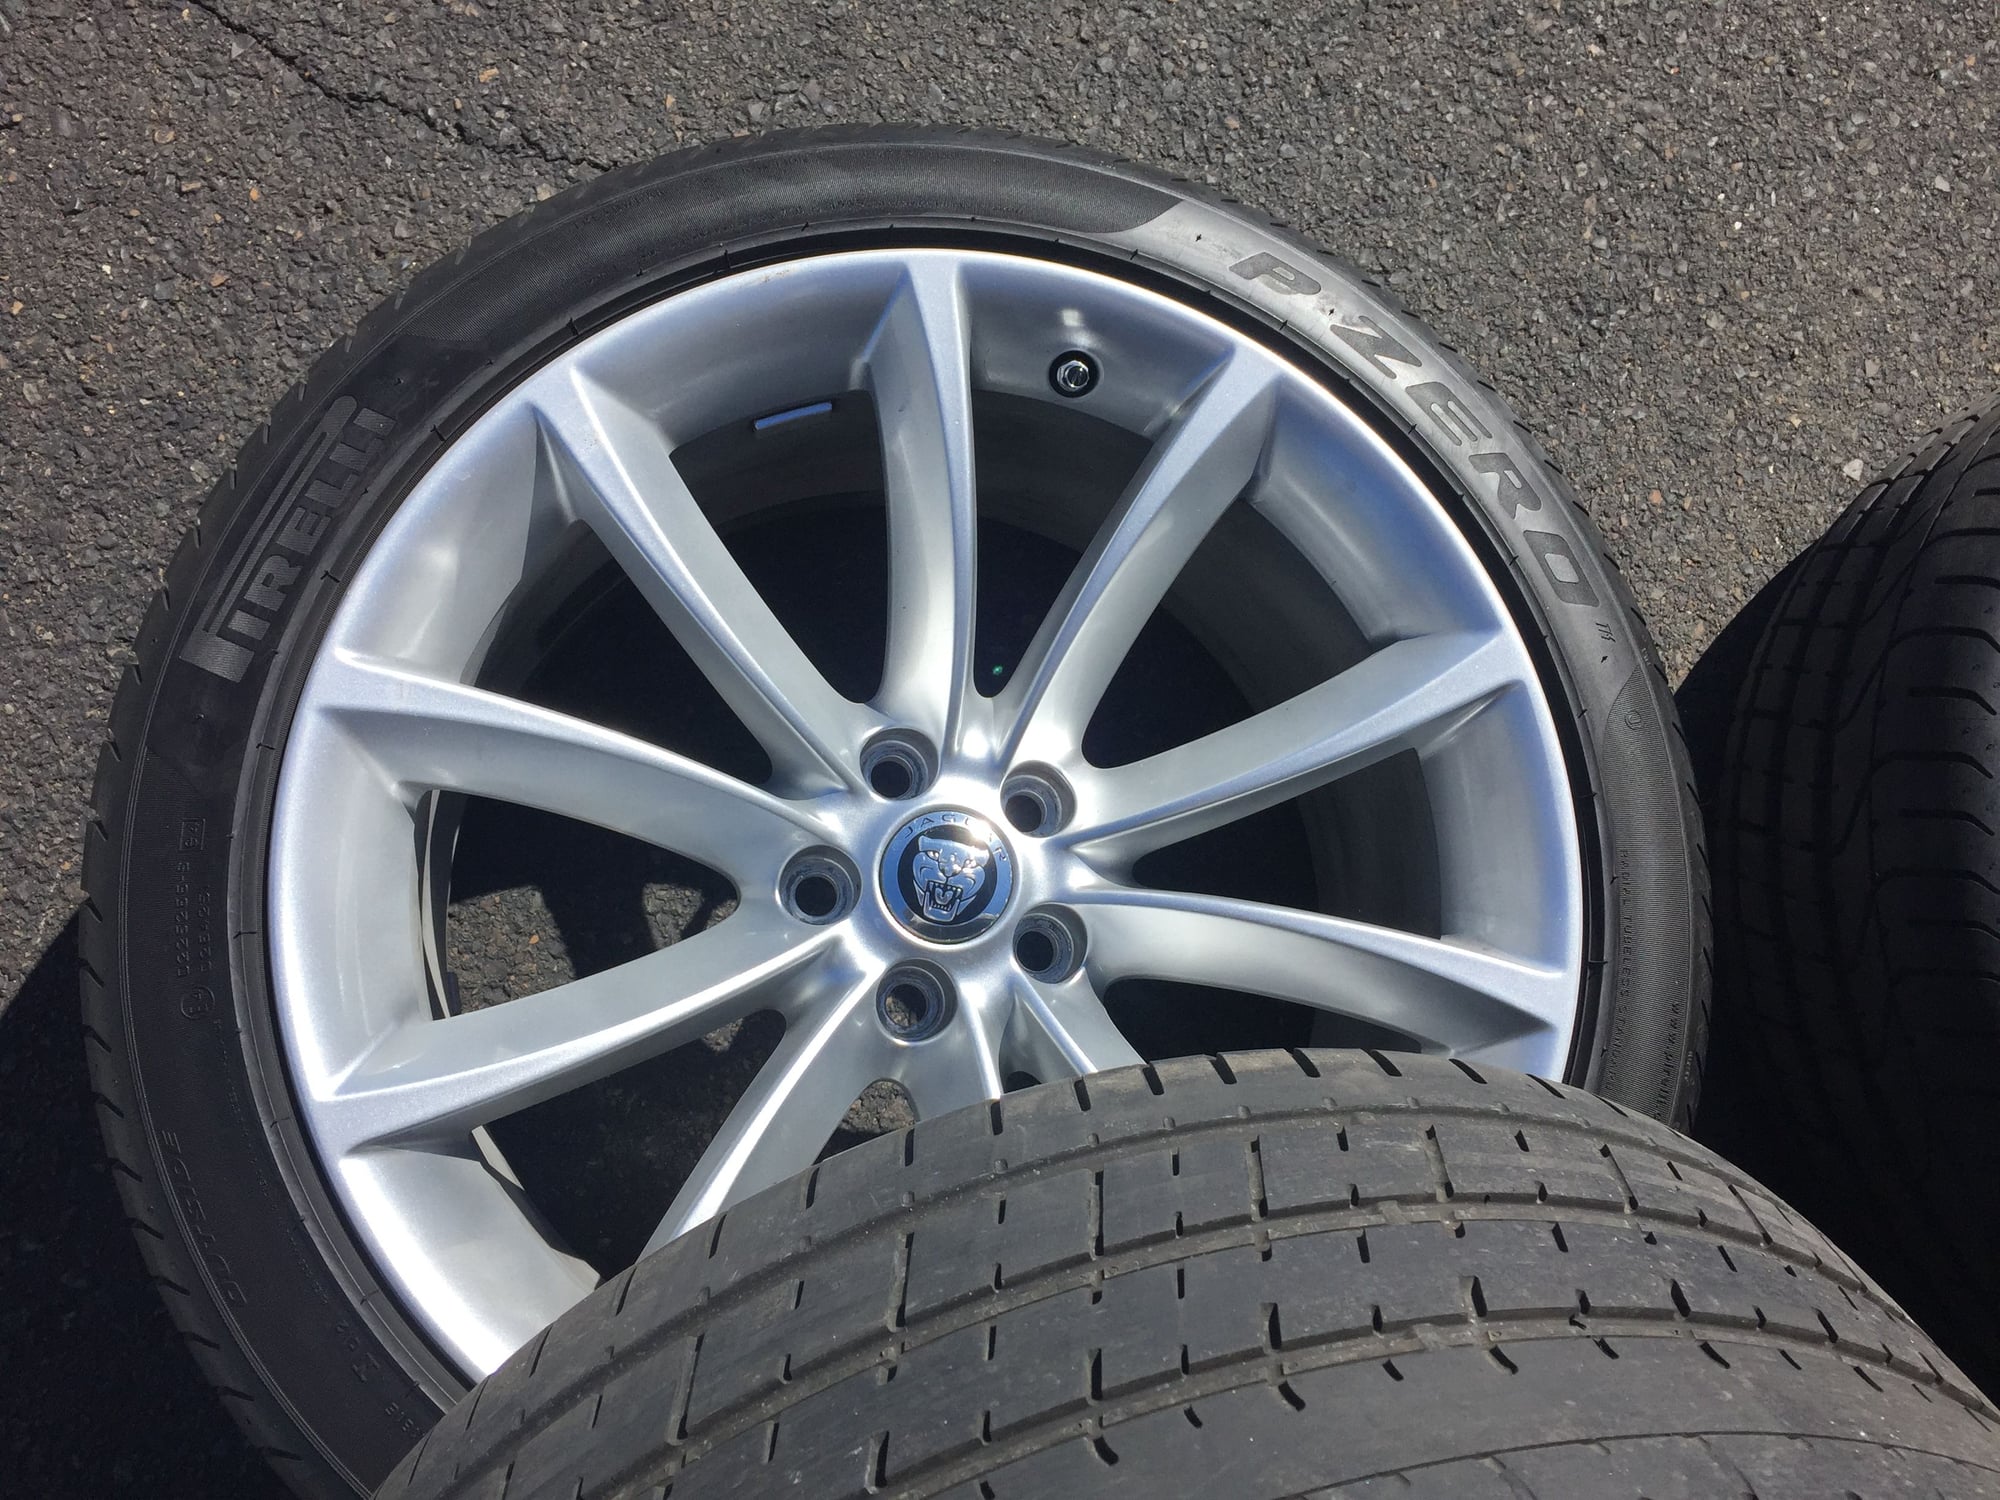 Wheels and Tires/Axles - 20" Cyclones in Black - Defect Free - Used - 2014 to 2020 Jaguar F-Type - Doylestown, PA 18929, United States